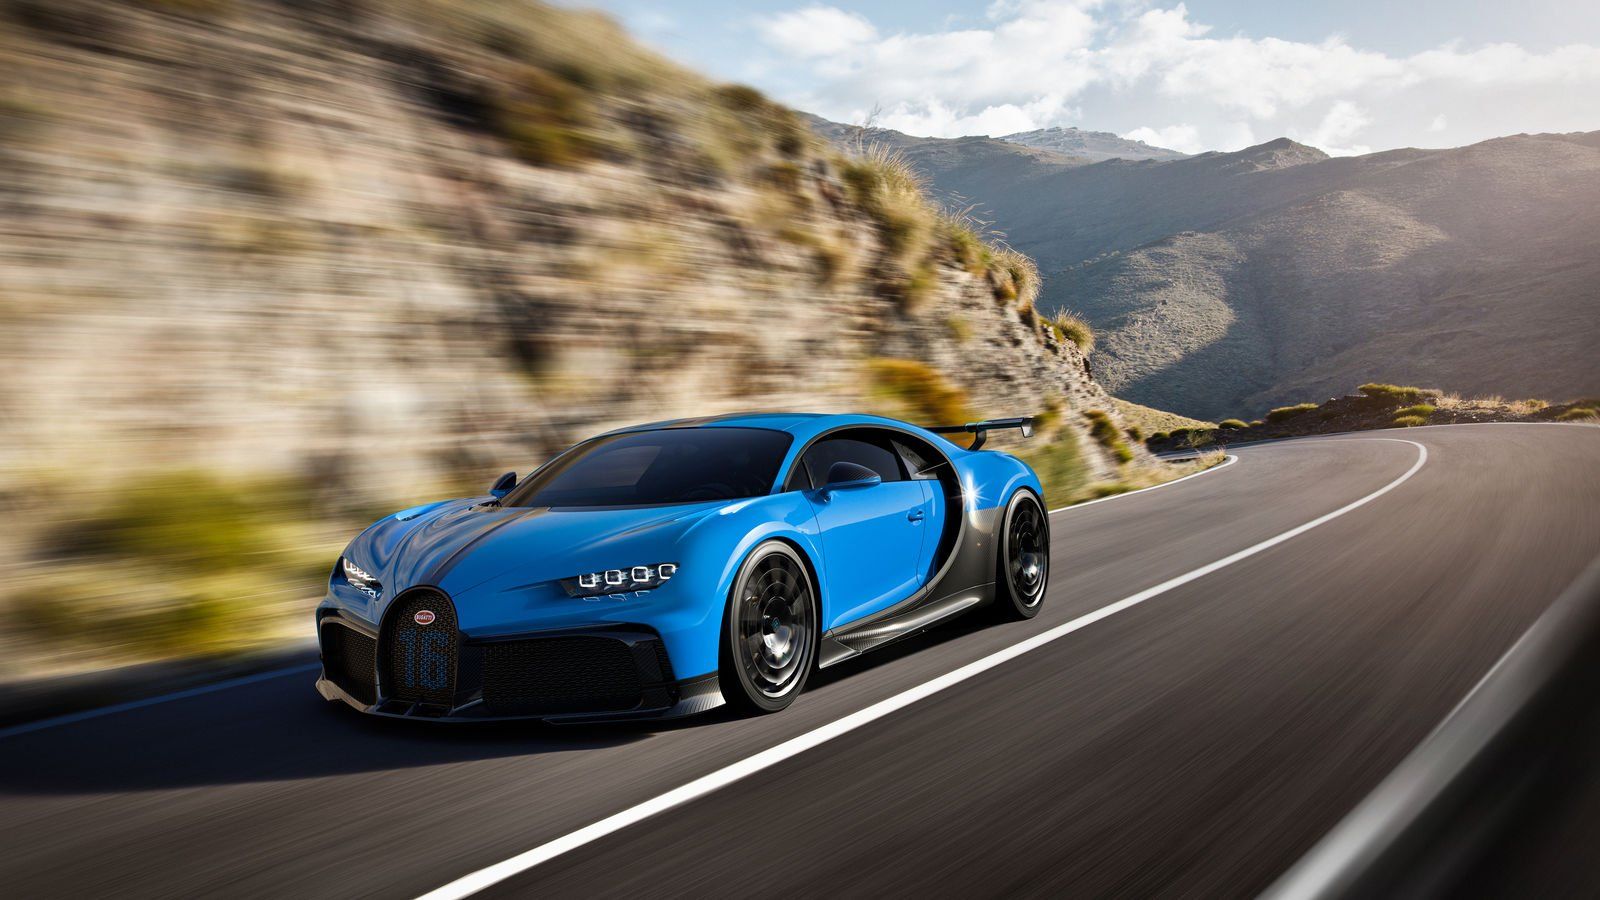 10_chiron-pur-sport_drive-3i4-front.jpg